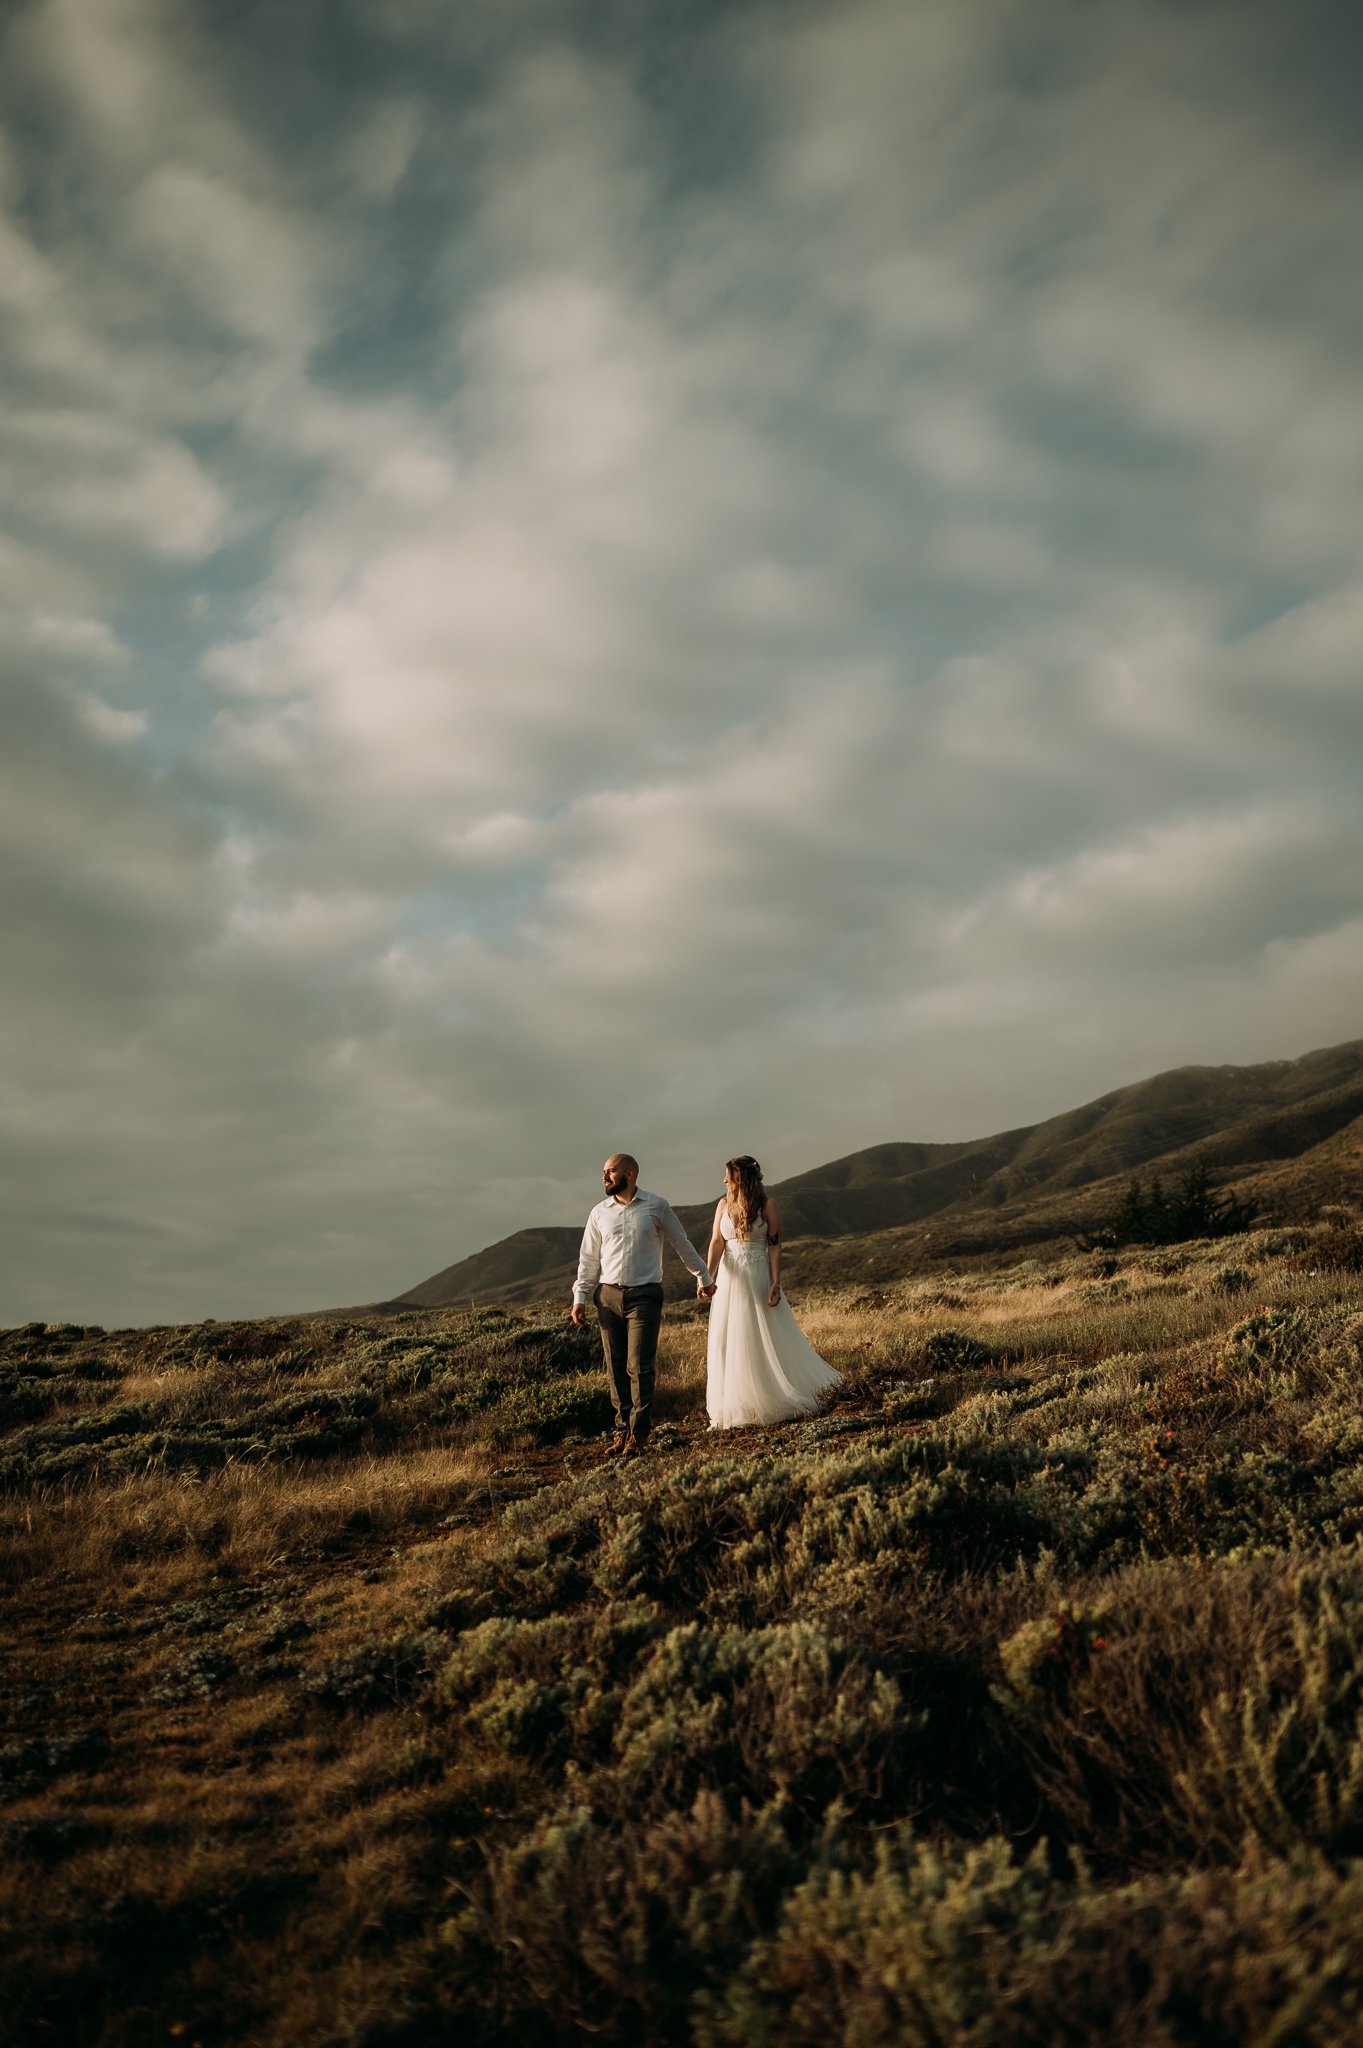 bride and groom standing in field with moody grey skies and hills in background gazing at Pacific Ocean Big Sur